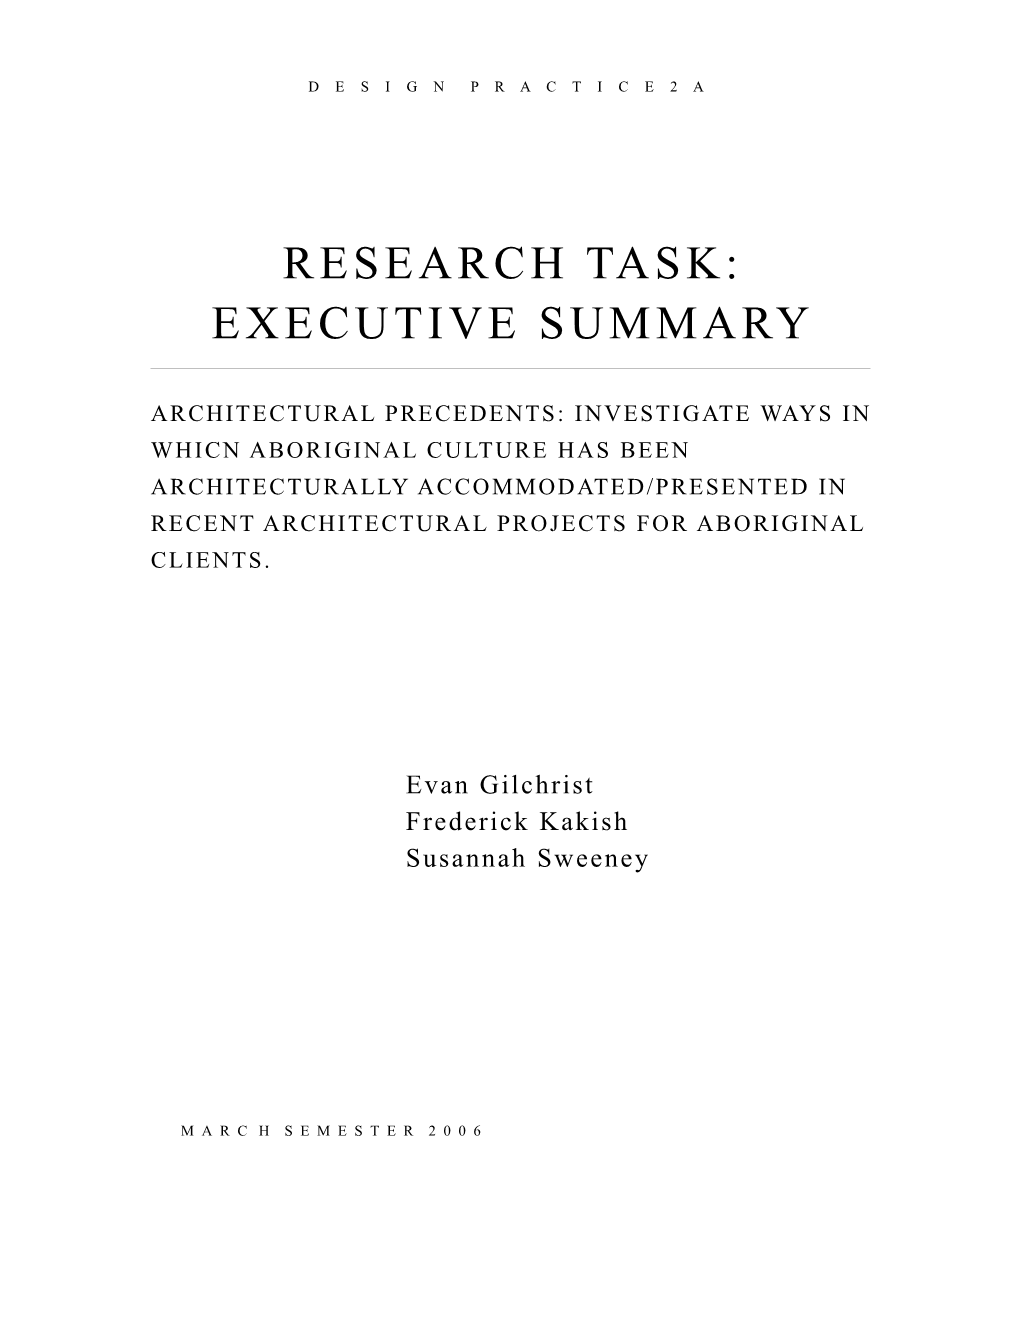 RESEARCH TASK: Executive Summary